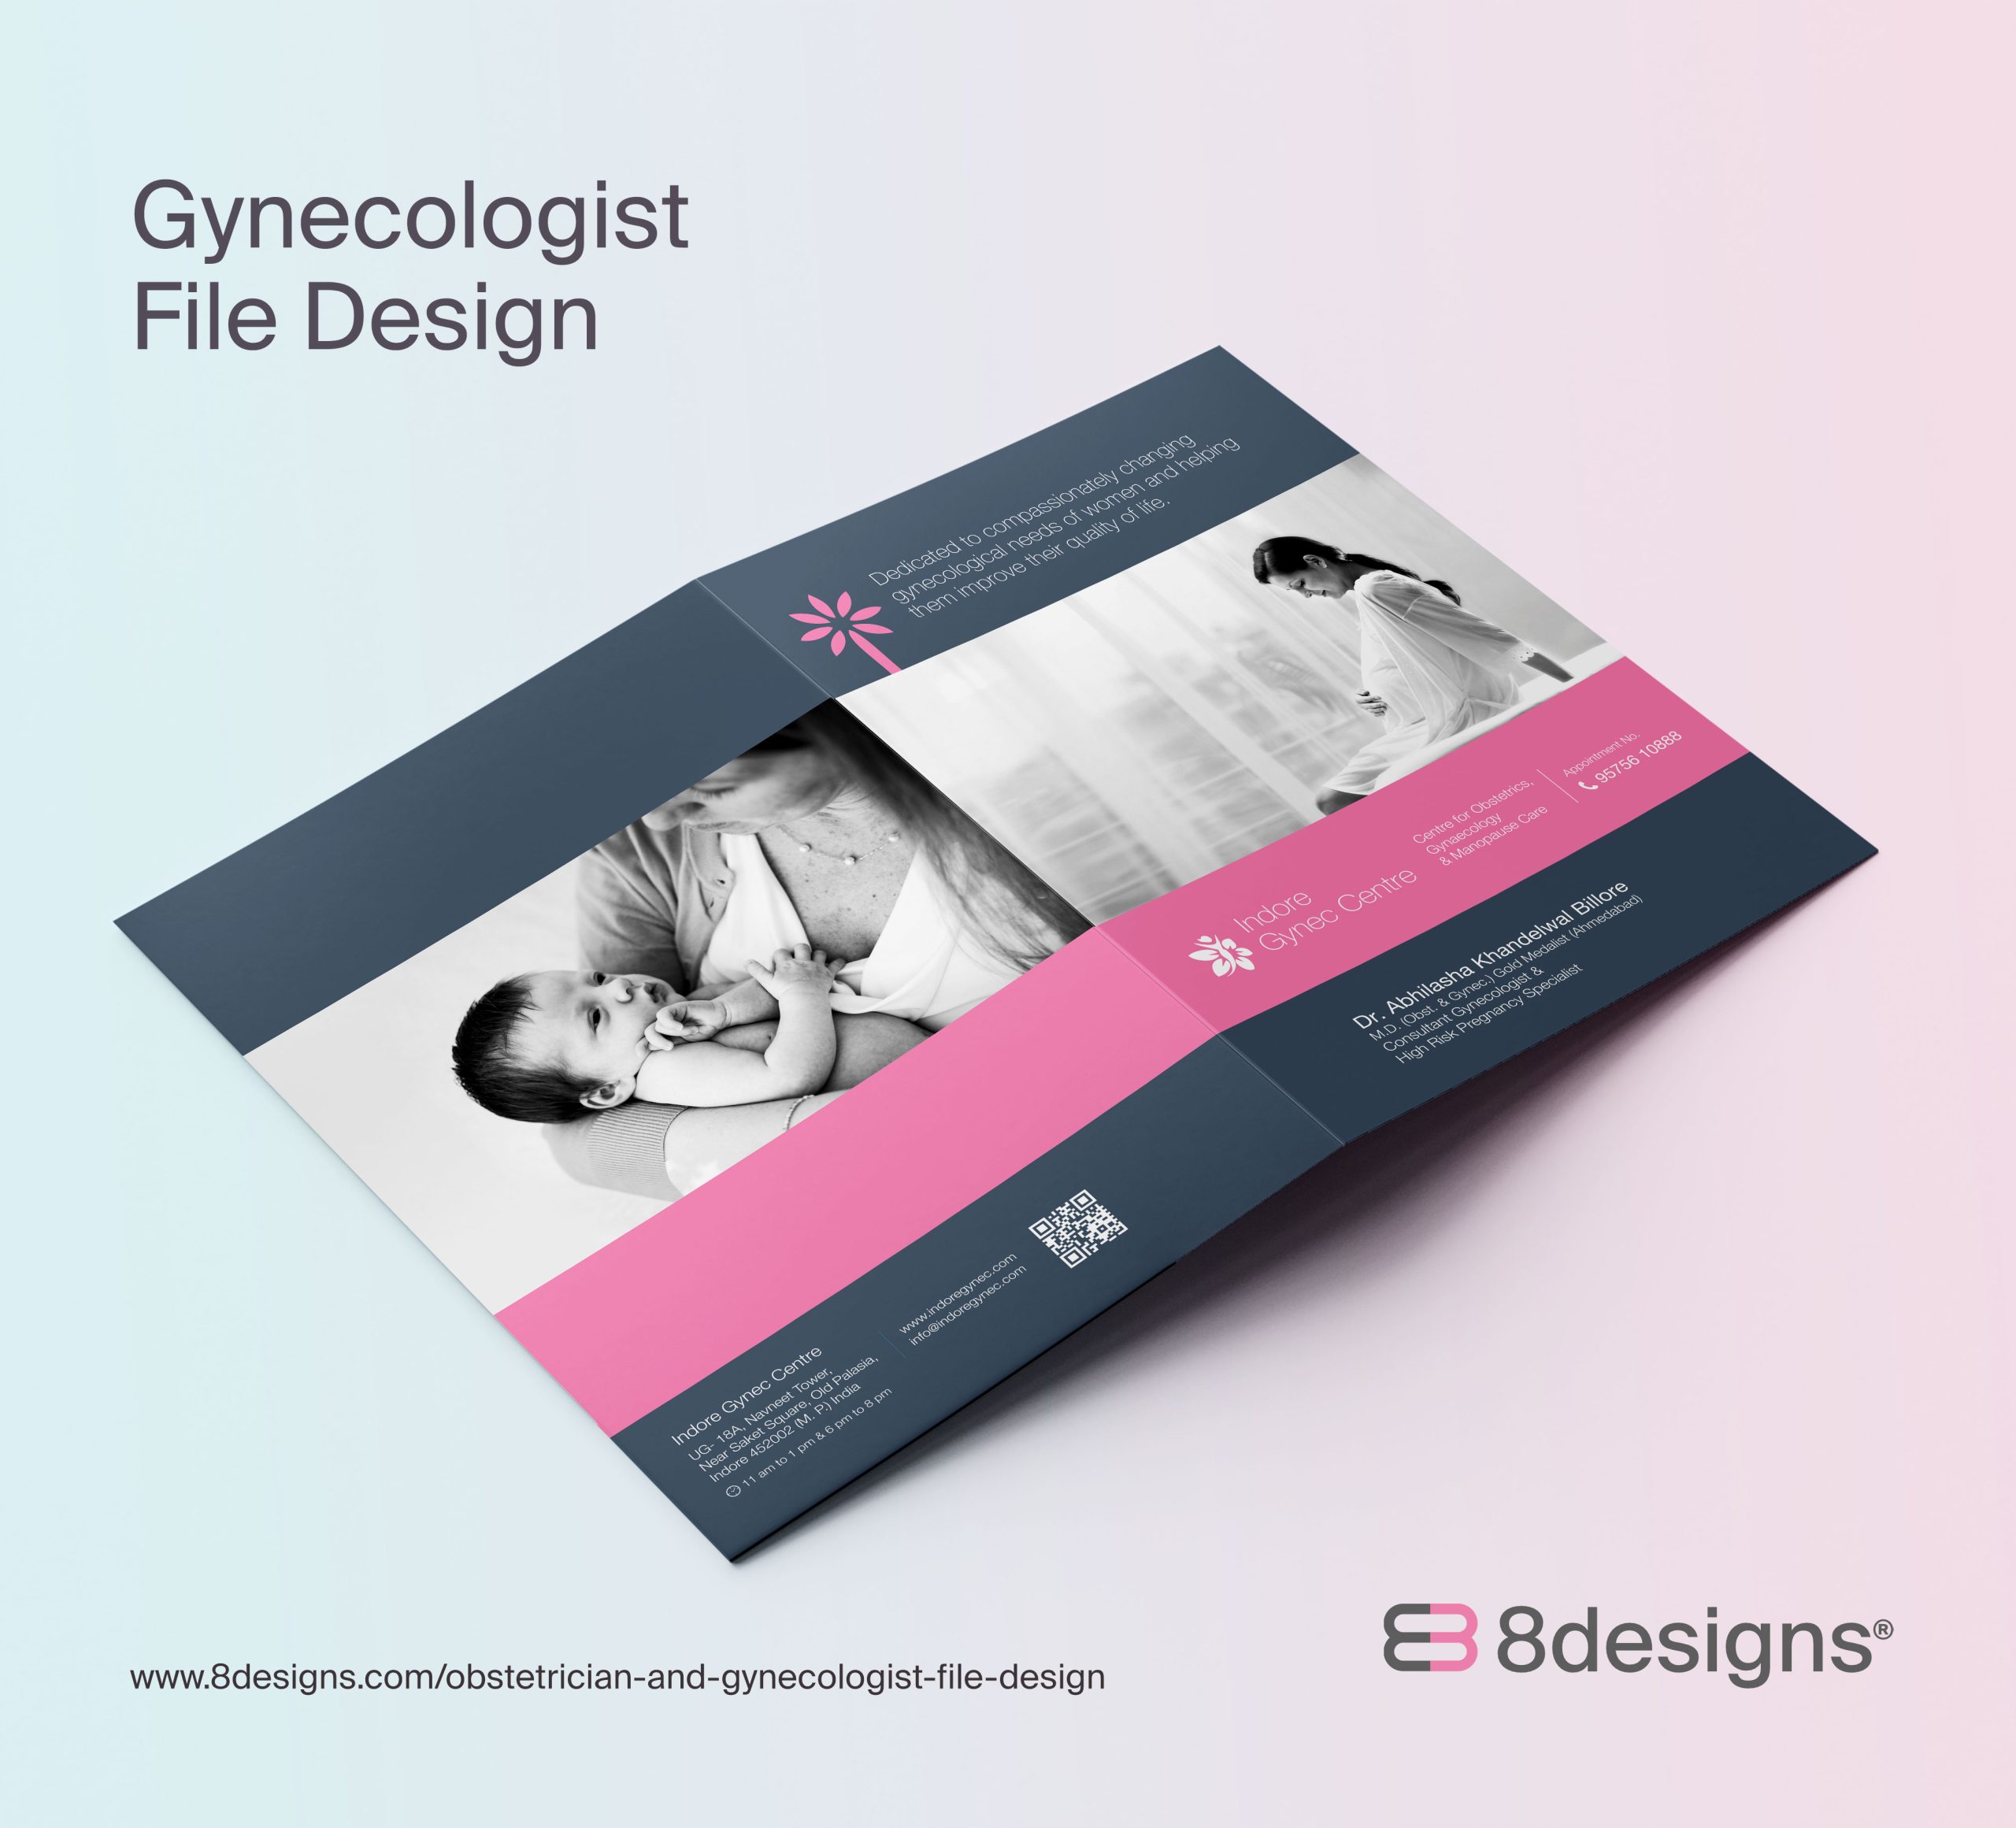 File Design for Obstetrician and Gynecologist - Gynaecologist File Design and Printing Solutions for Women’s Clinic, Obstetric Centre and Women's Hospital